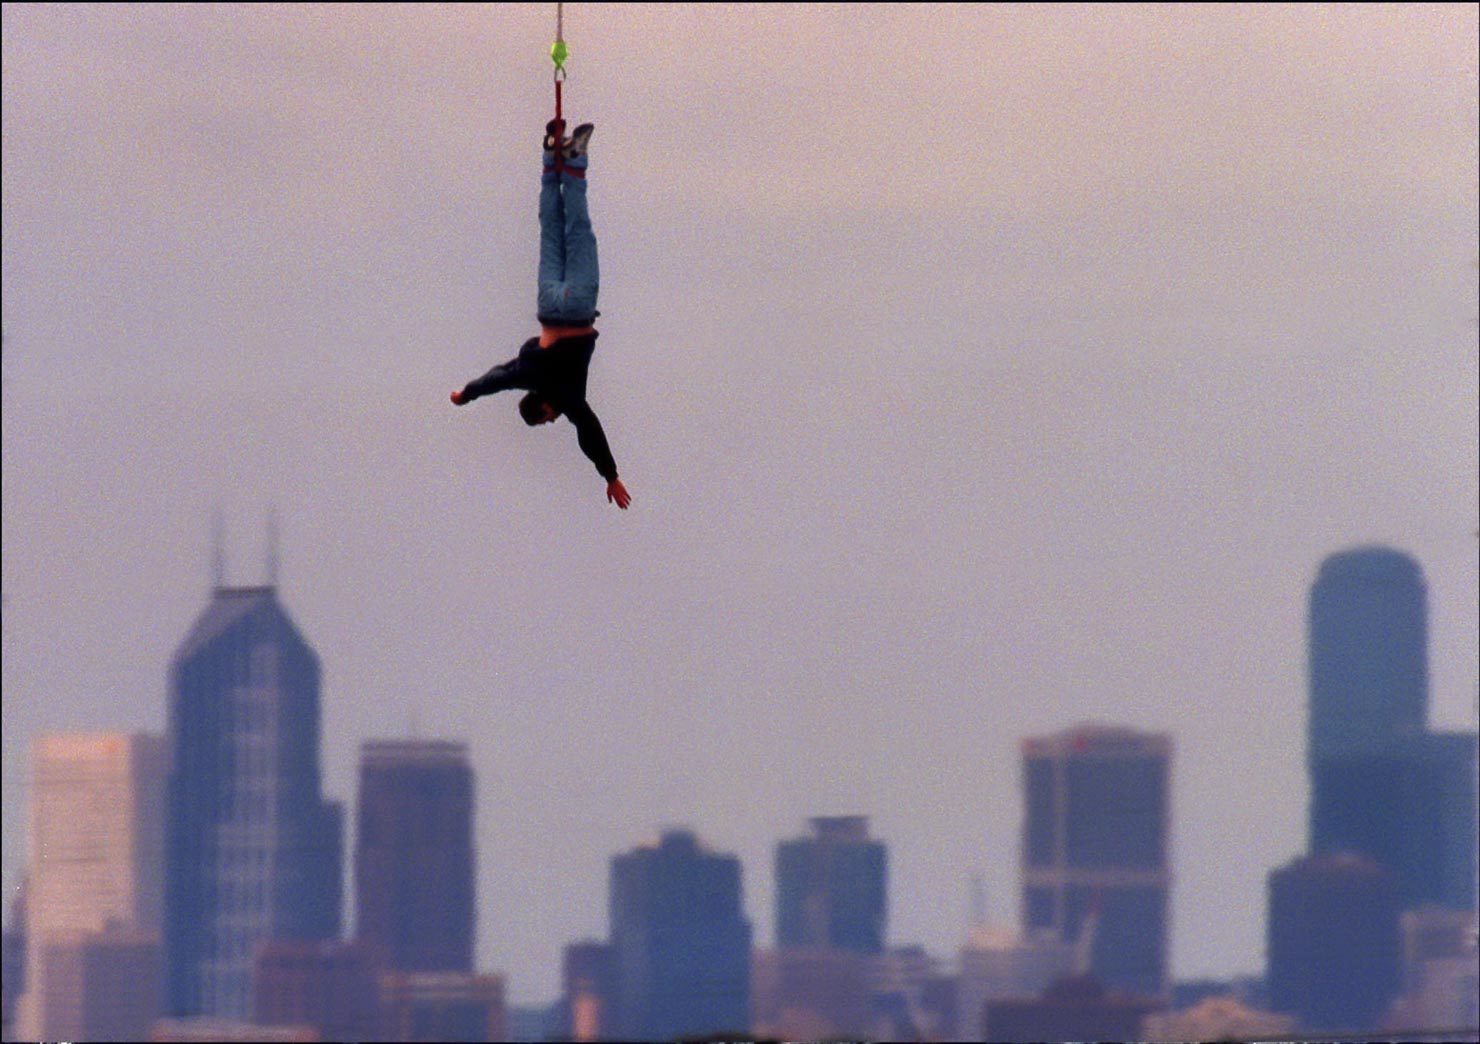 A man bunjee jumping with city backdrop